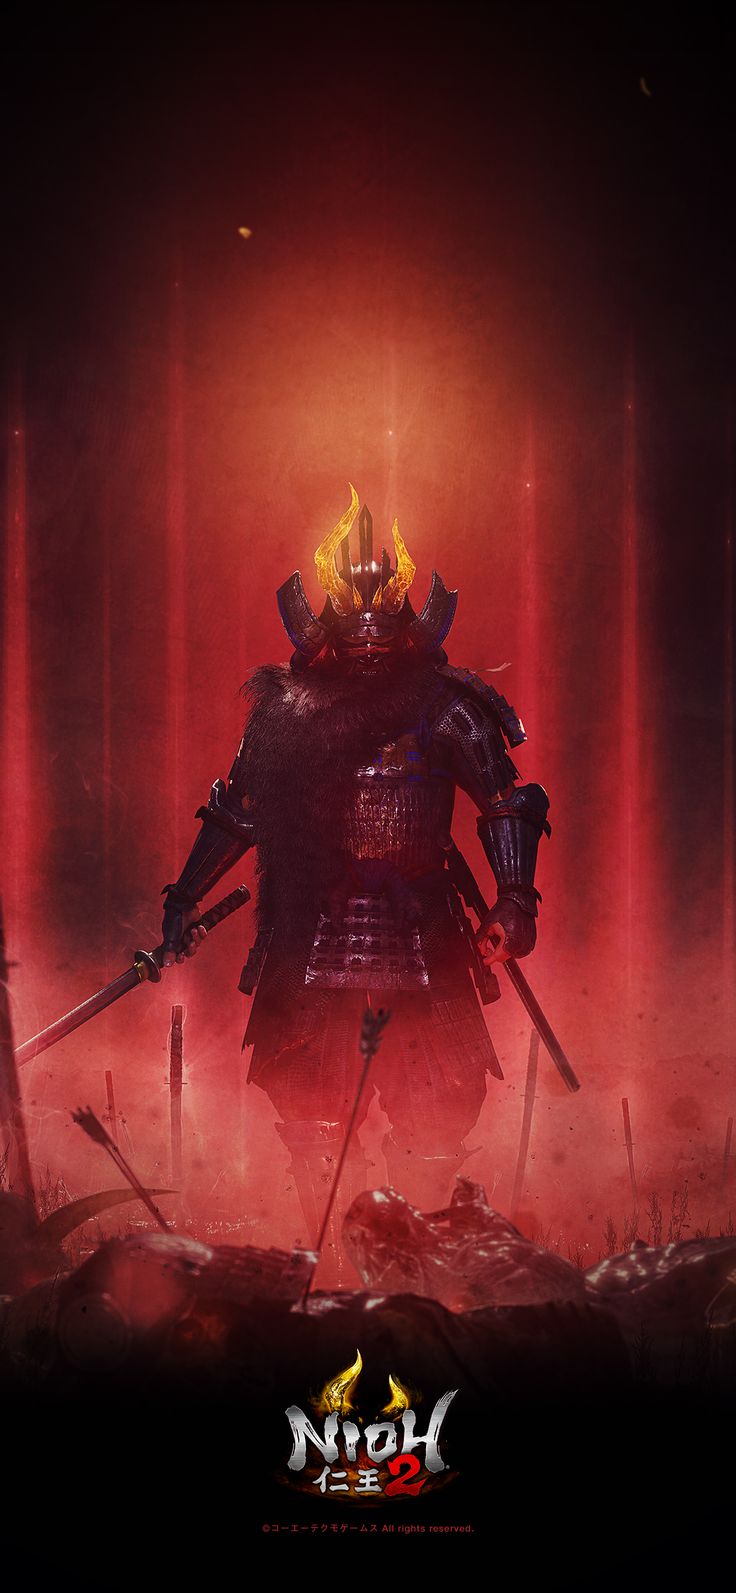 Game Poster of Nioh Wallpapers